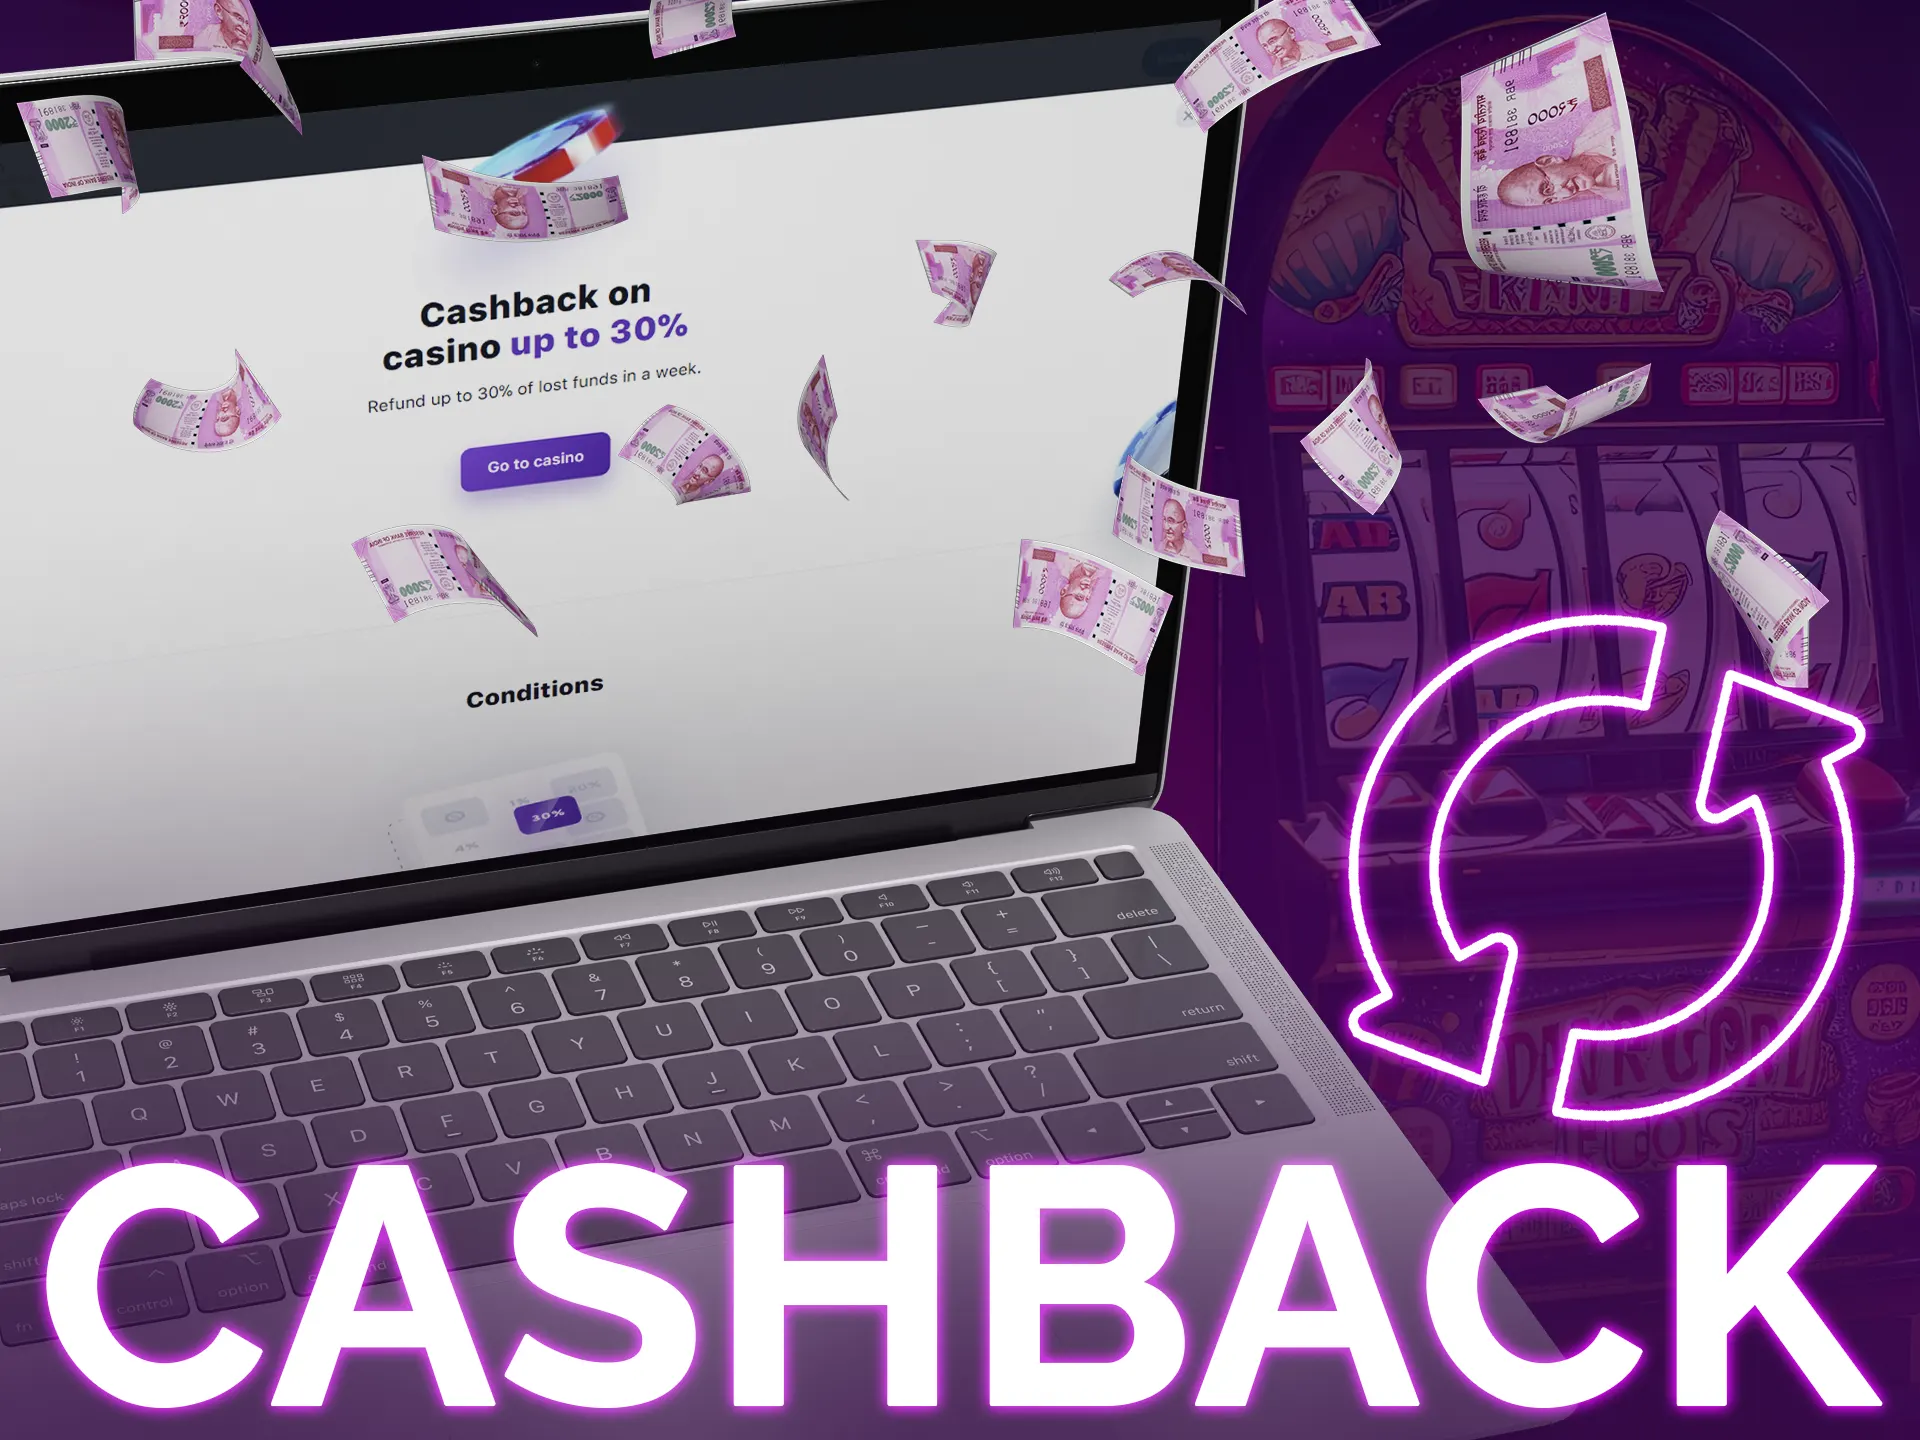 Get the cashback and be able to return to the game.